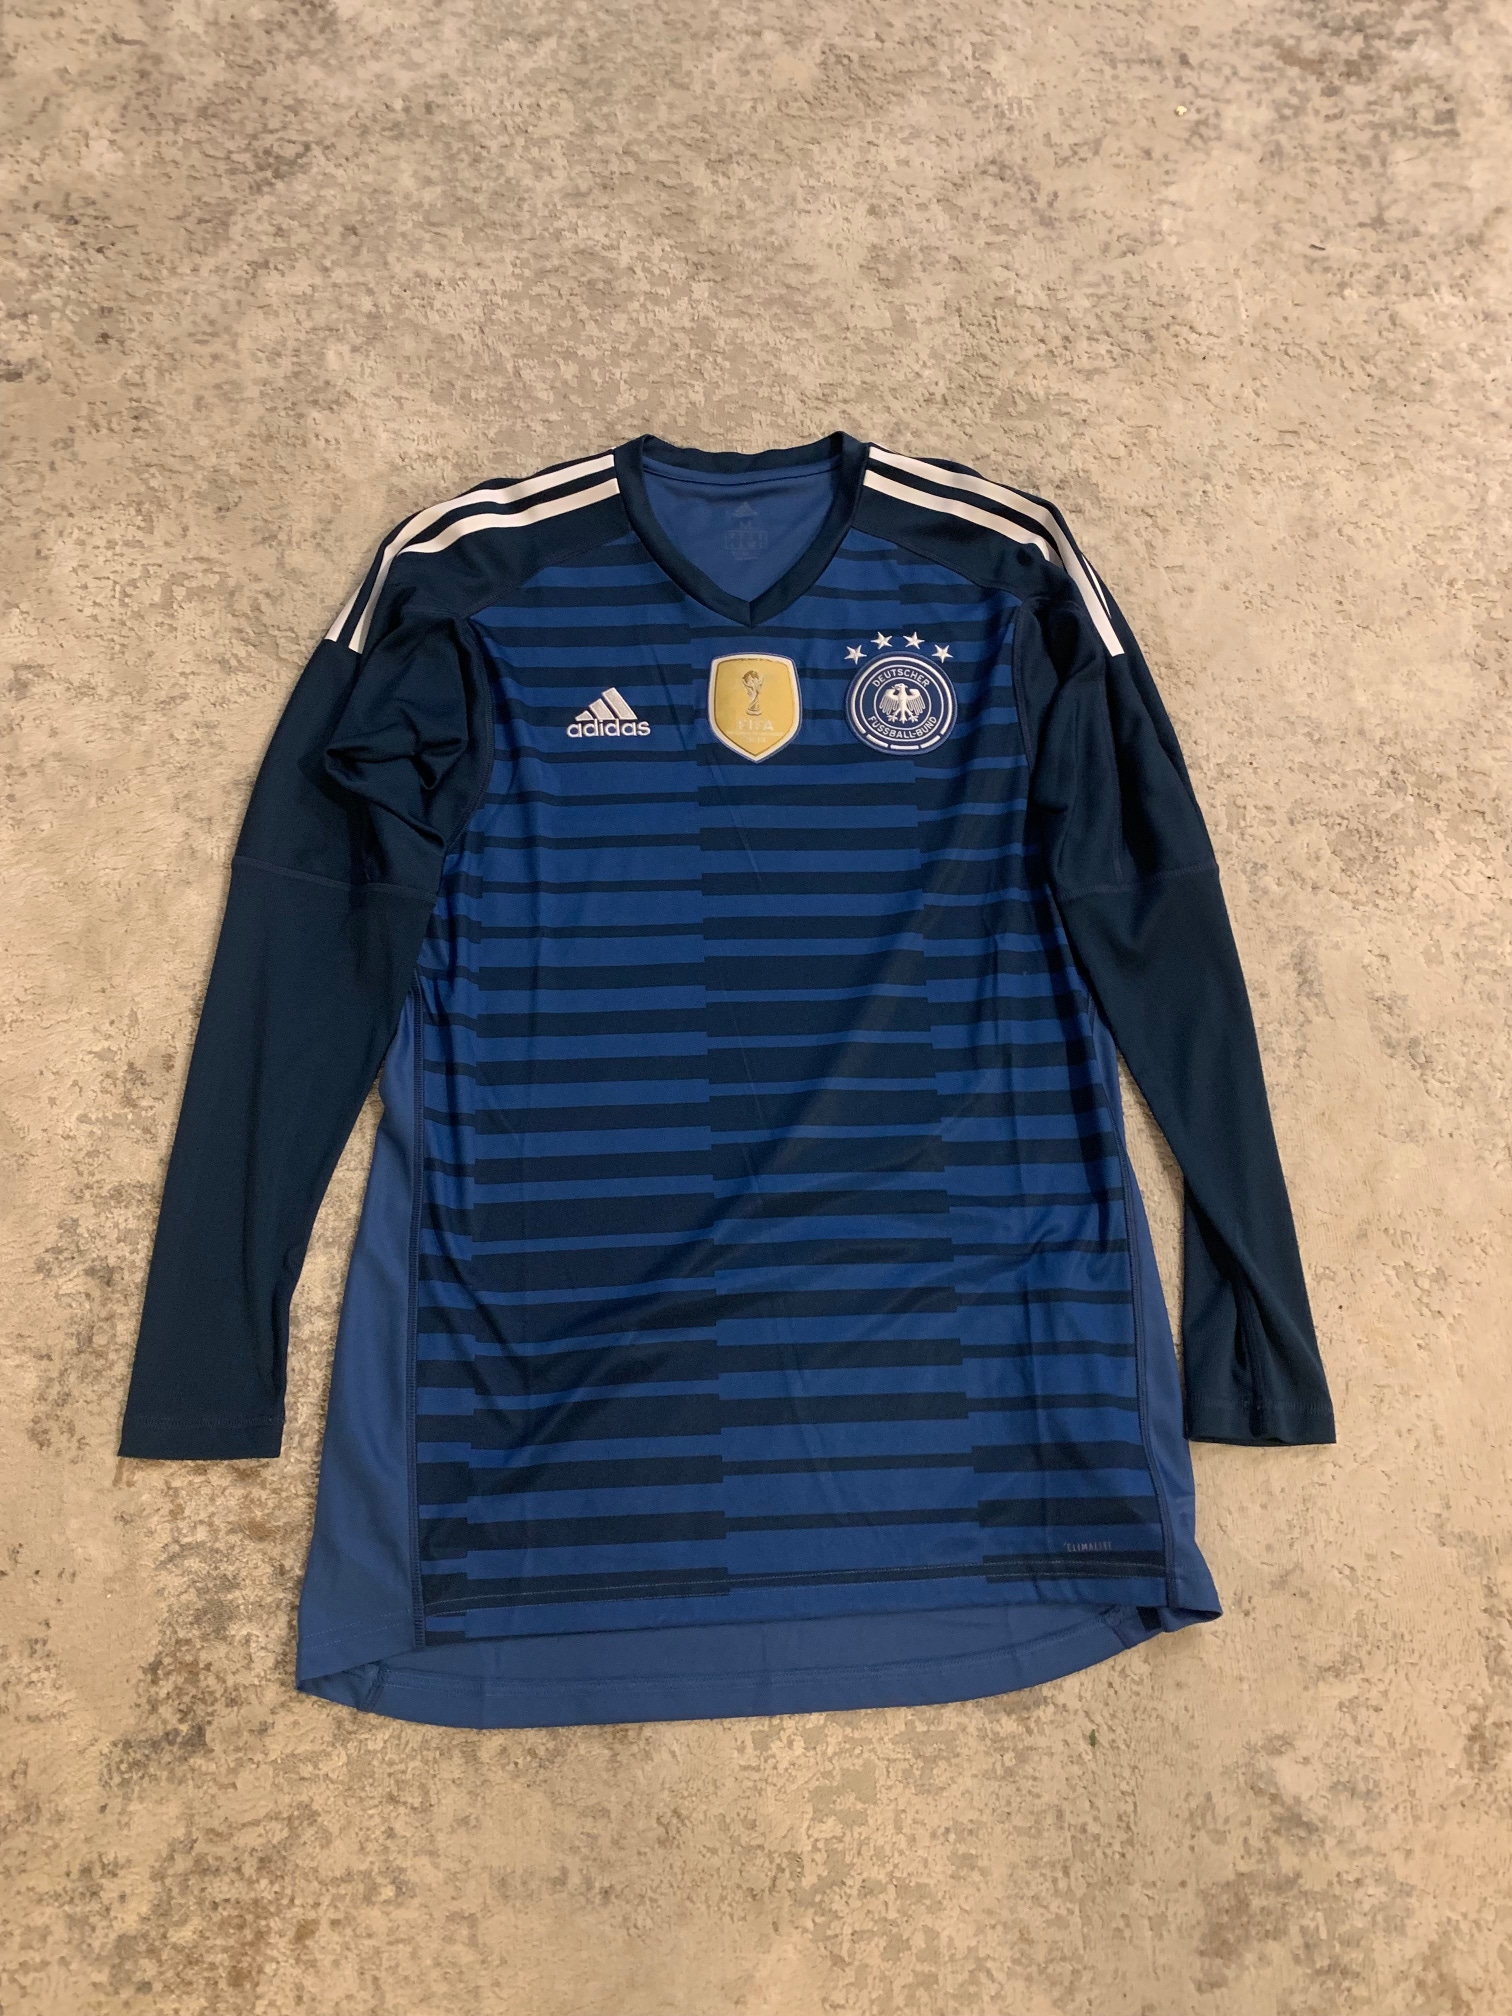 Germany 2018-19 Authentic Player Issued Goalkeeper Jersey - Blue - Size M - Excellent Condition